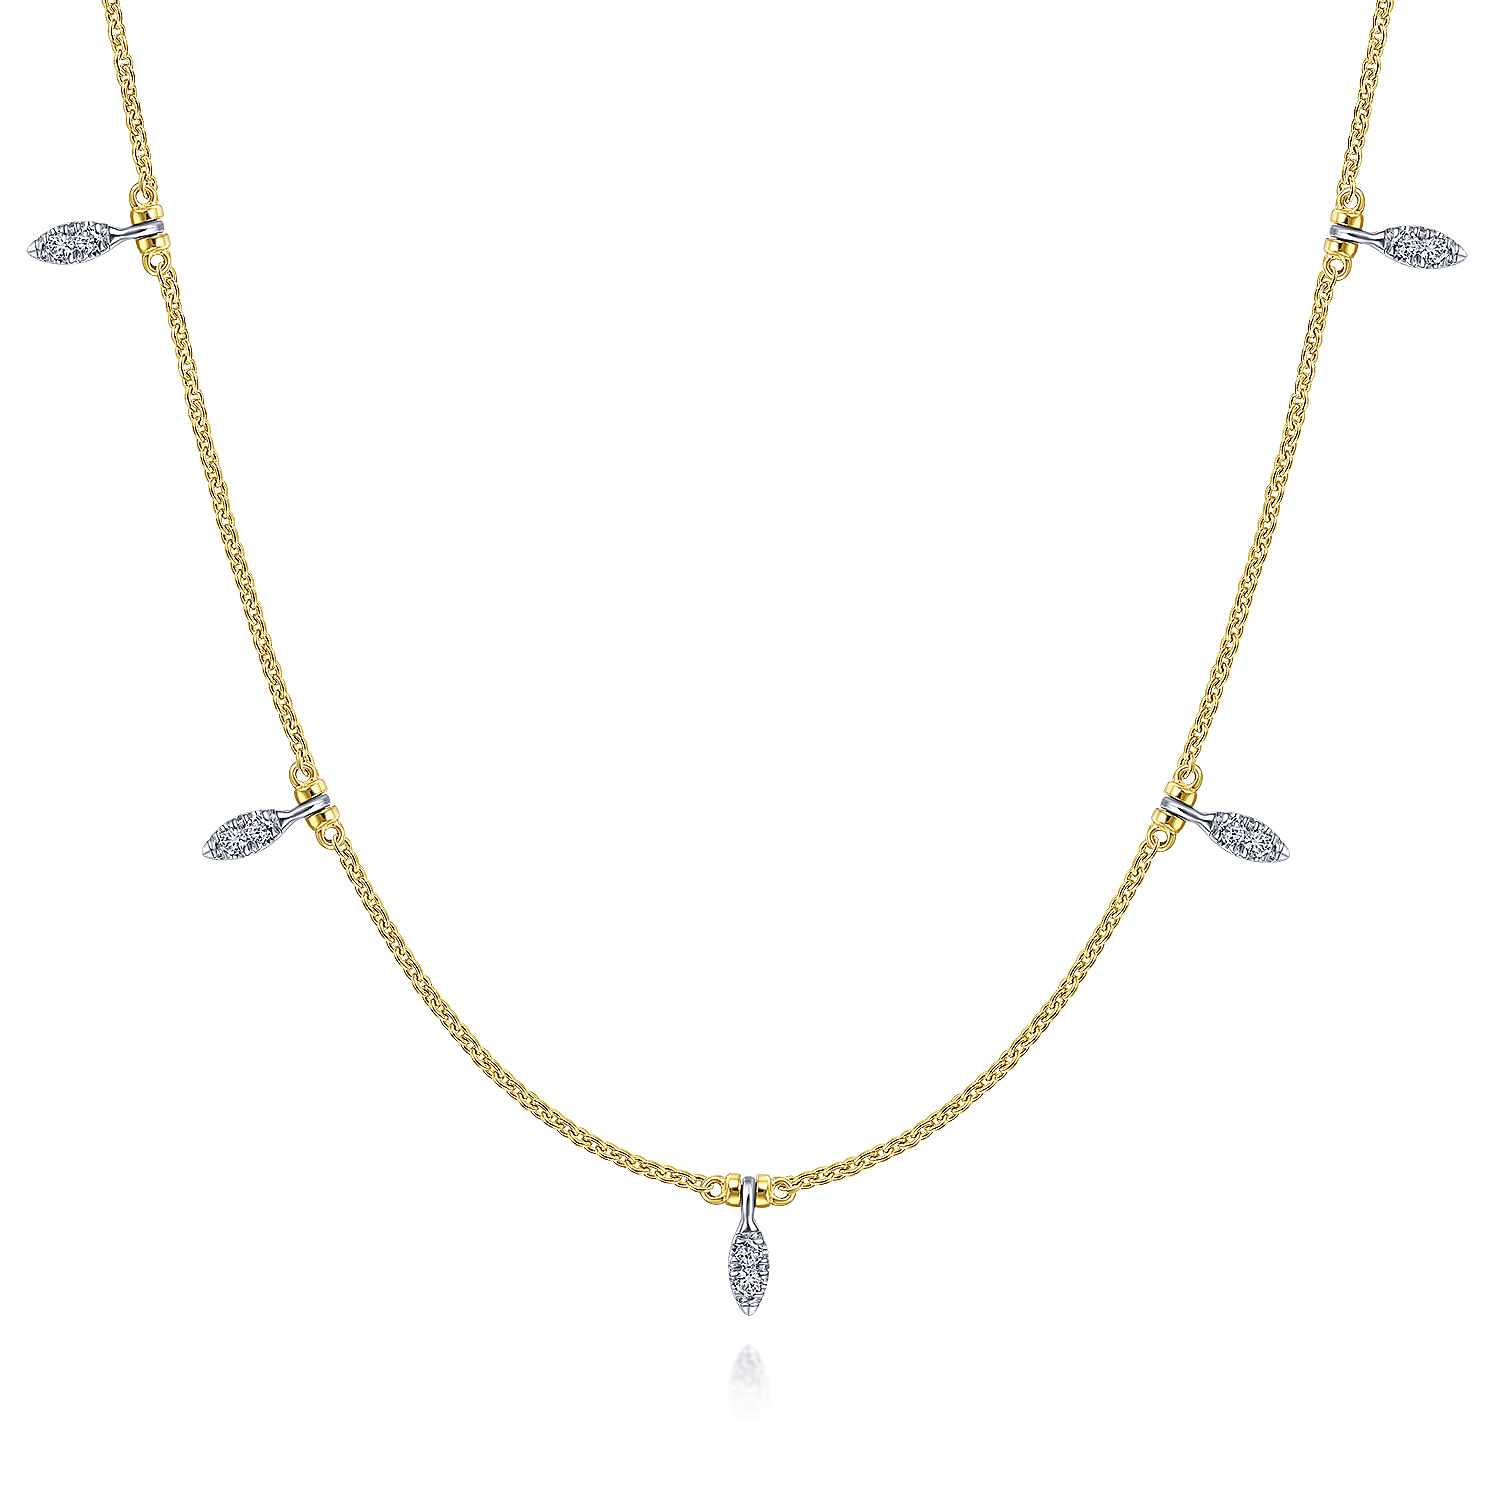 14K Yellow-White Gold Chain Necklace with Diamond Pavé Leaf Drops